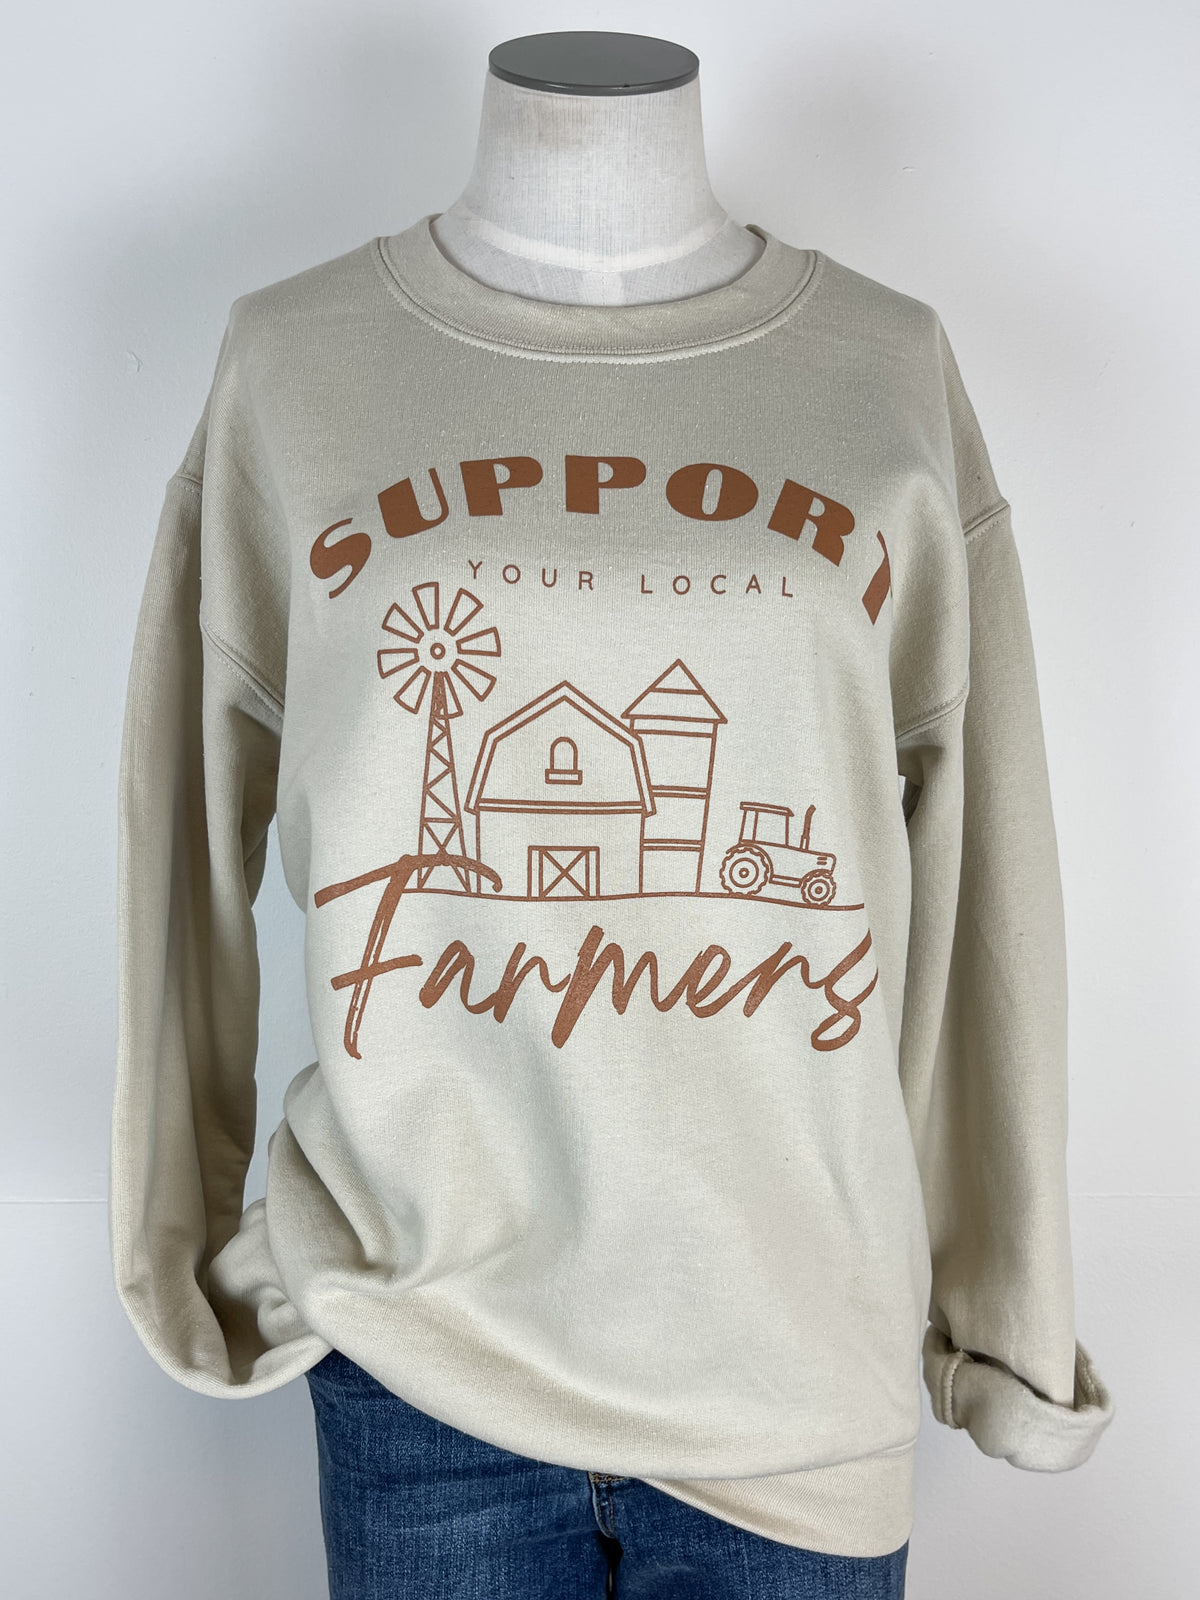 Support Your Local Farmers Sweatshirt in Sand